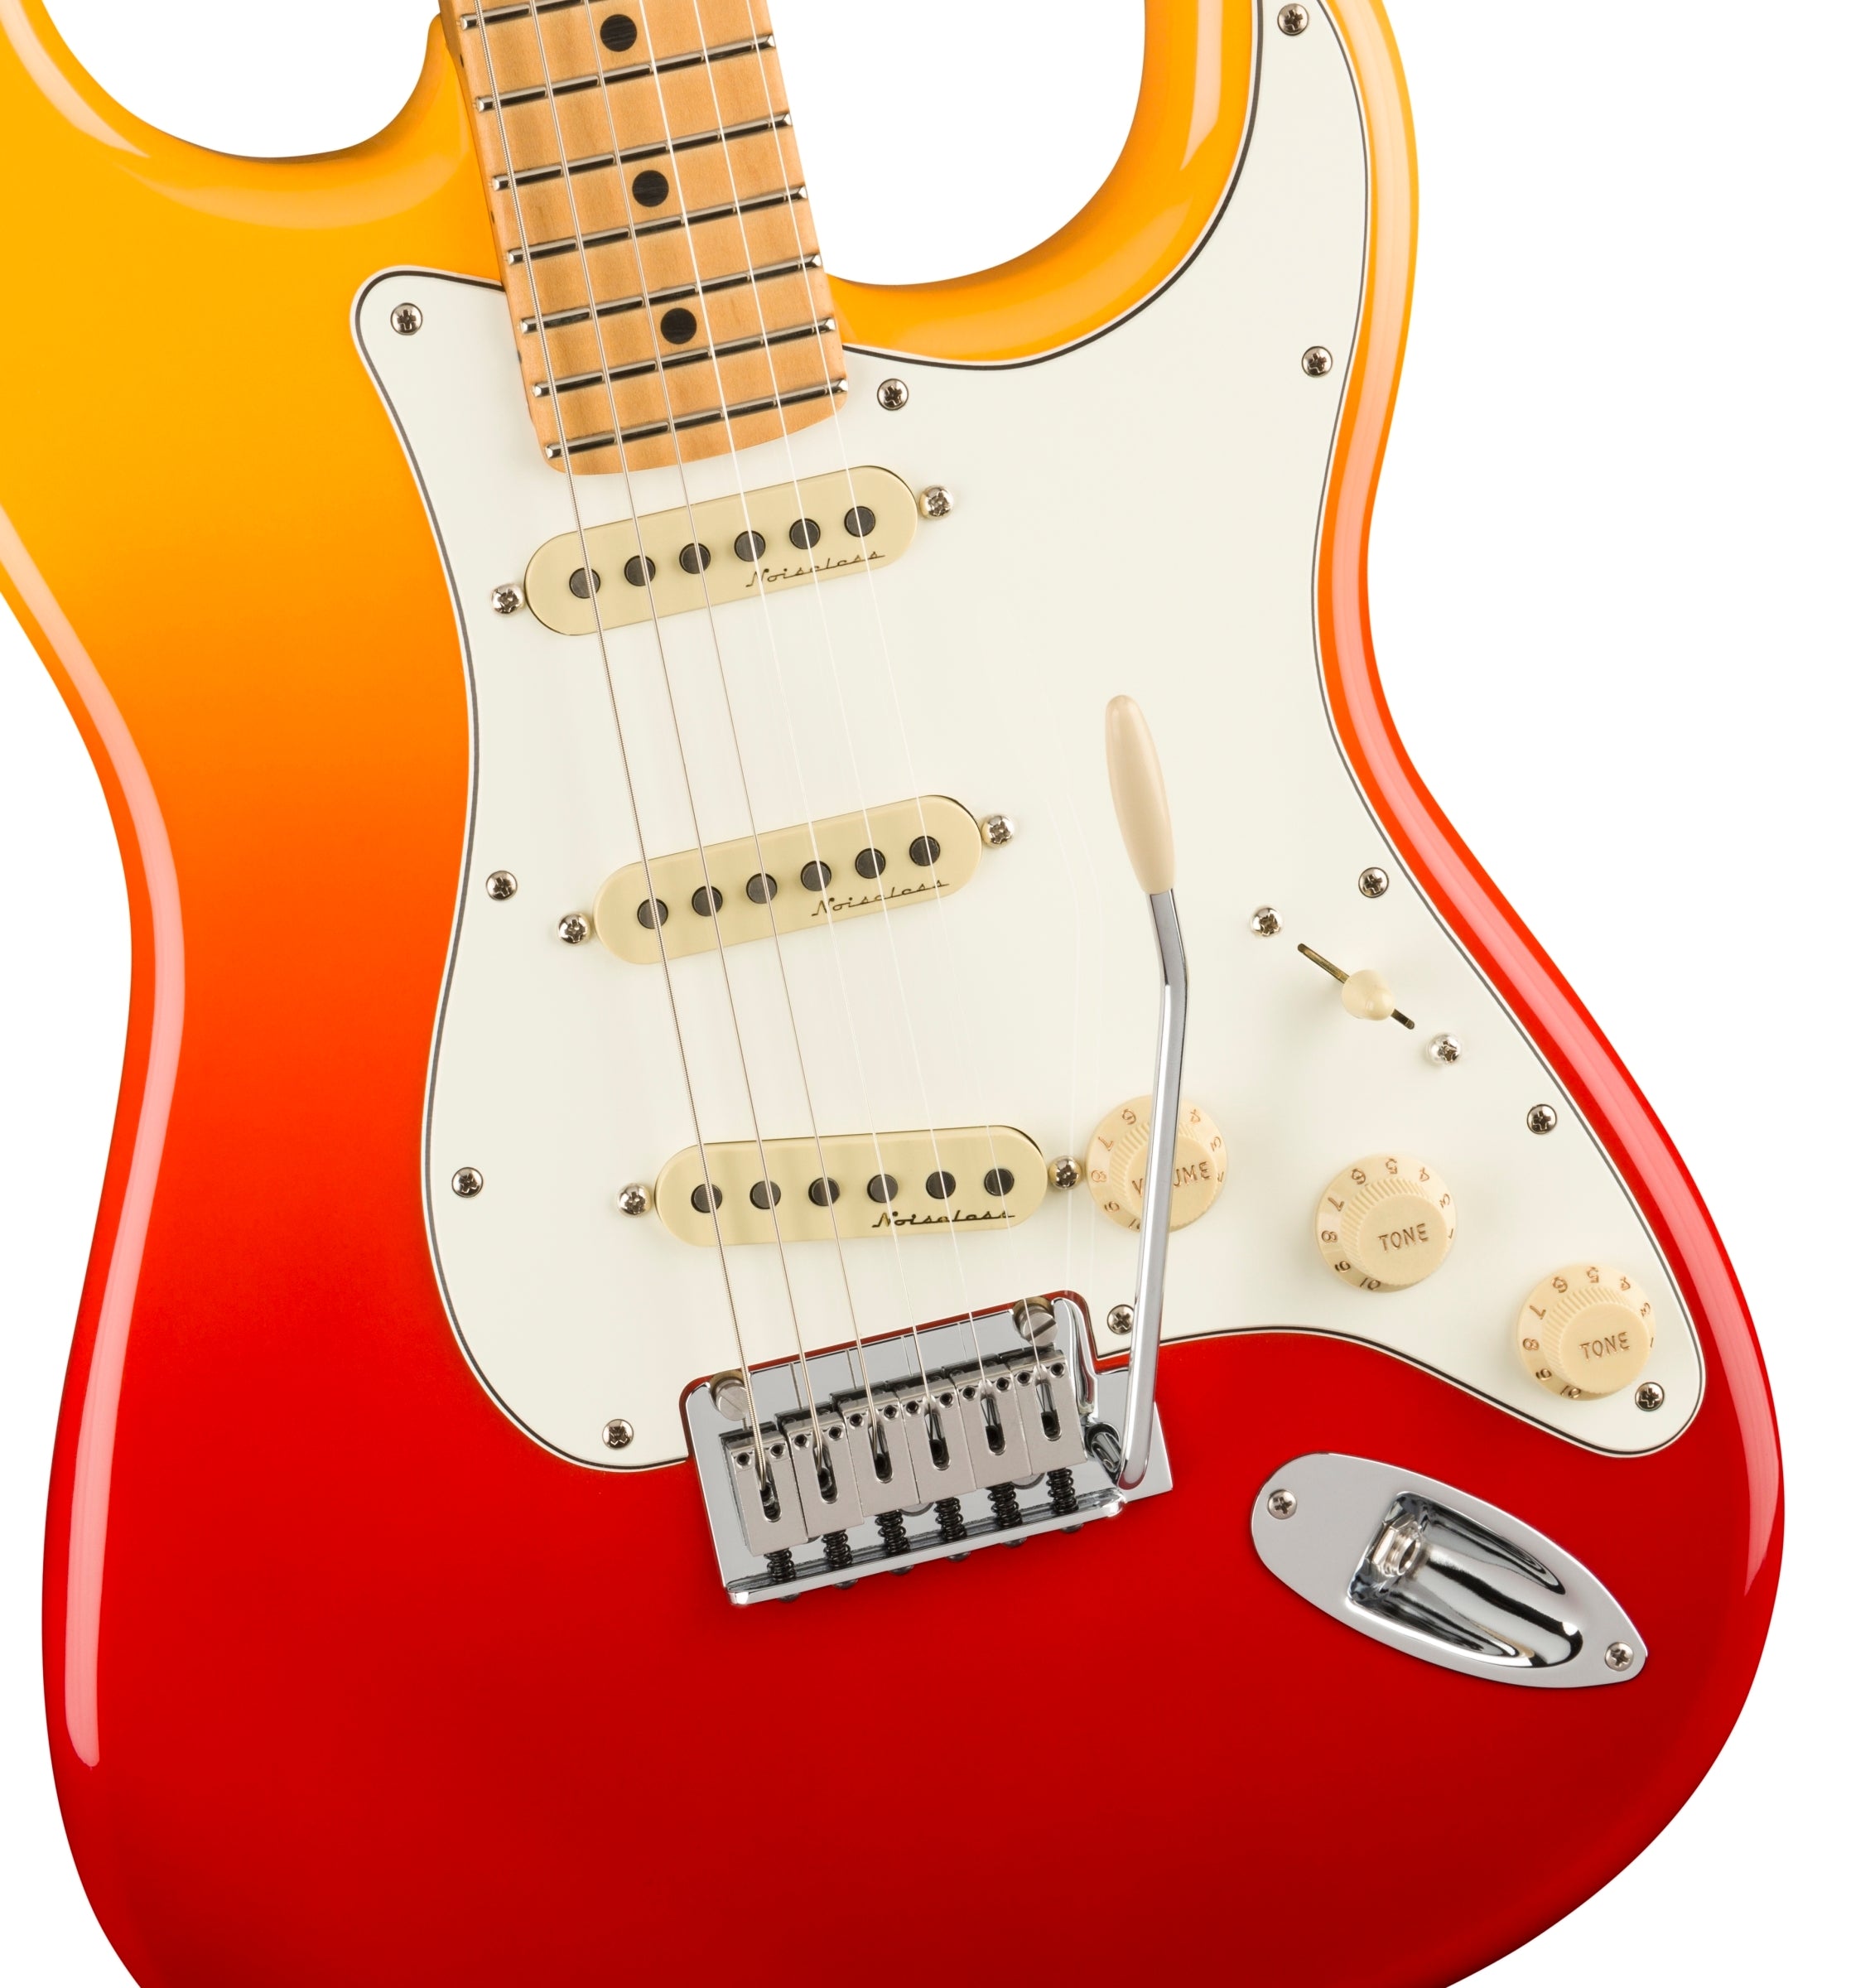 Fender Player Plus Stratocaster Electric Guitar - Tequila Sunrise